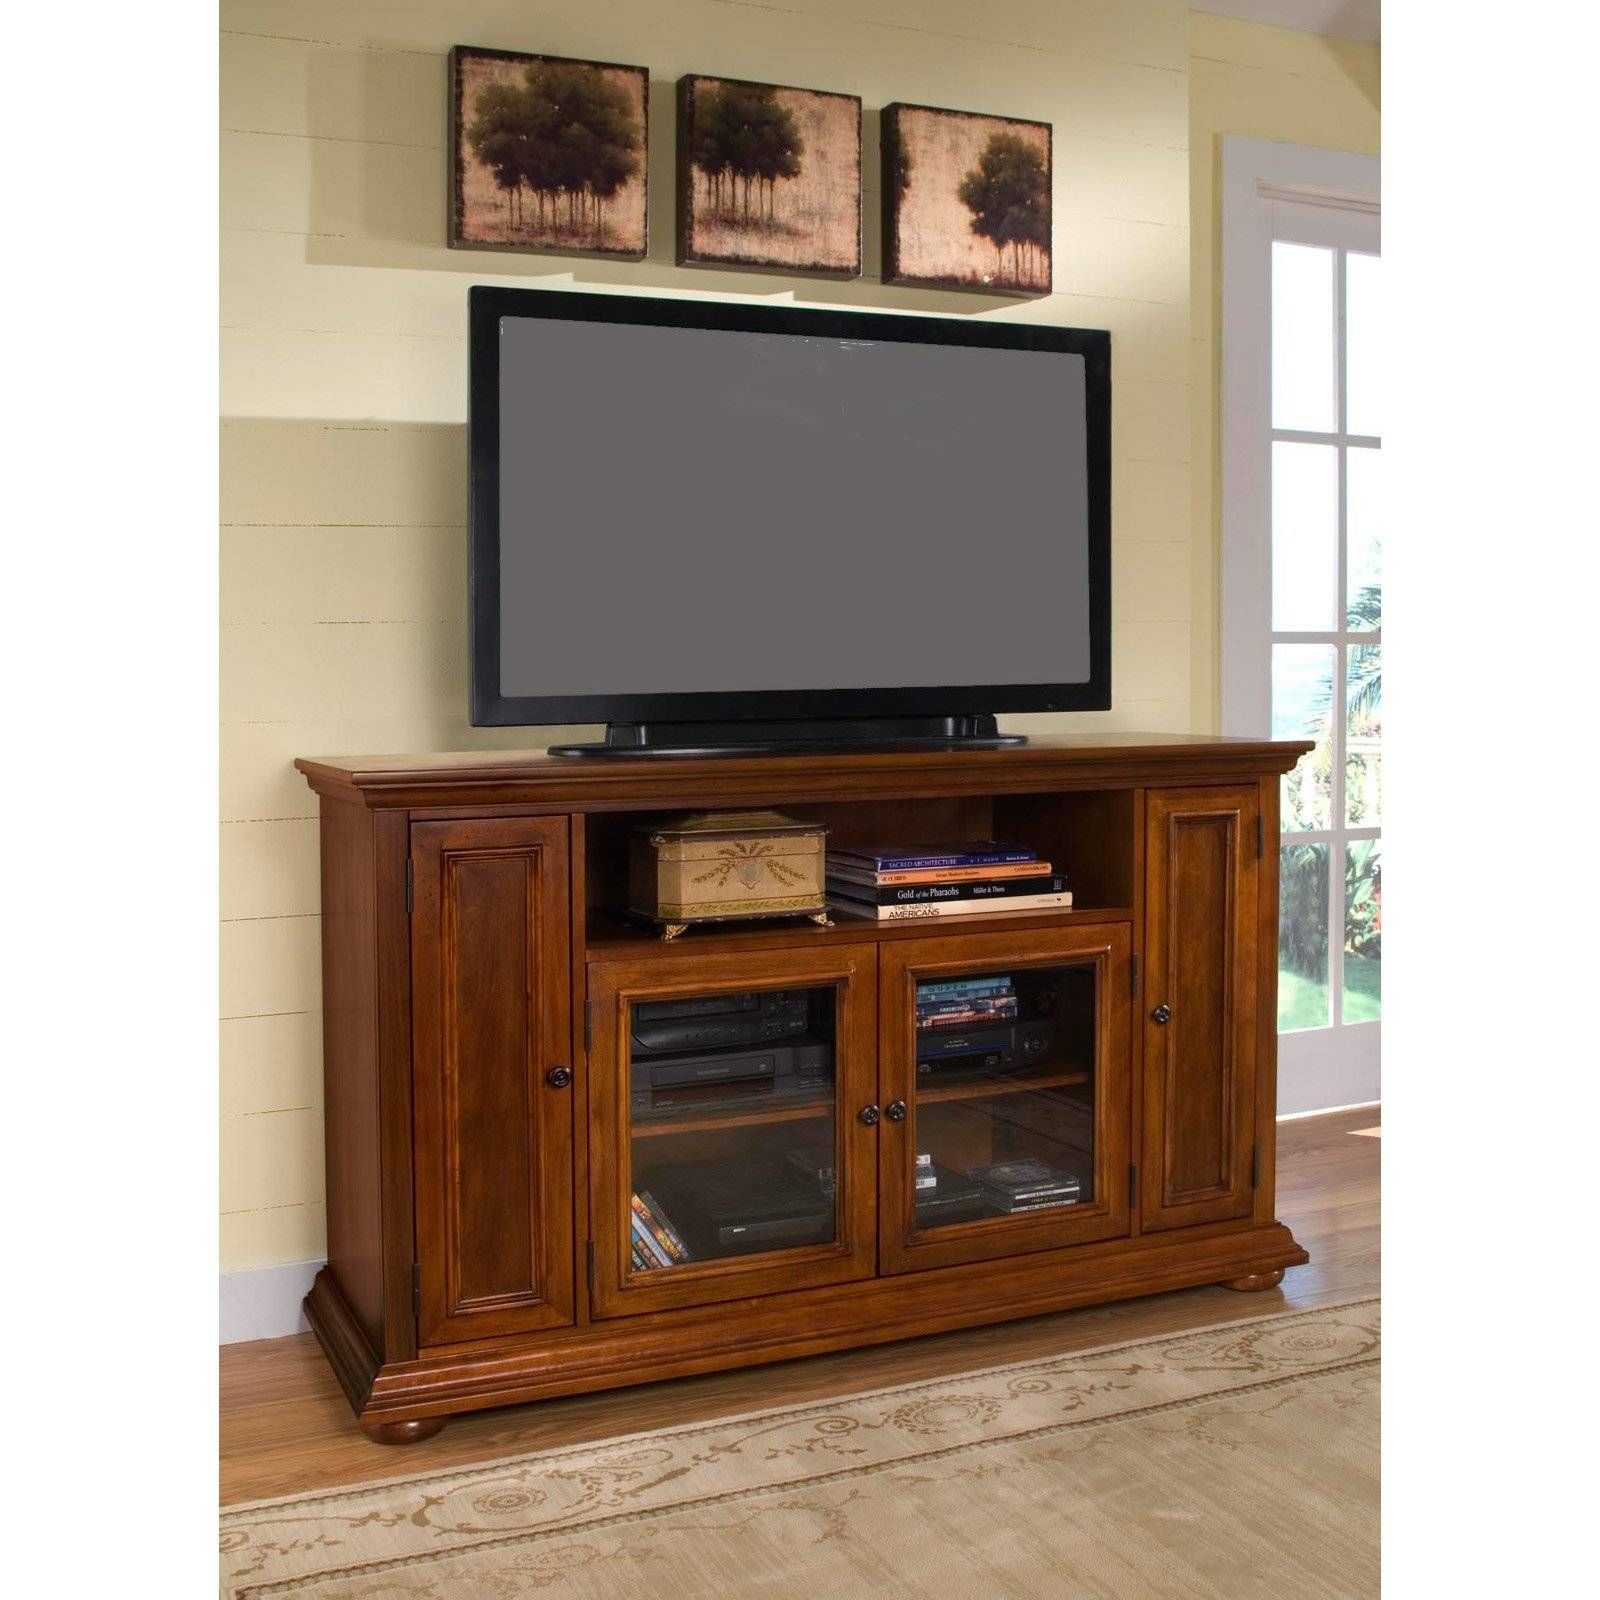 Glossy Brown Enclosed Tv Cabinets For Flat Screens With Doors Intended For Enclosed Tv Cabinets For Flat Screens With Doors (View 6 of 15)